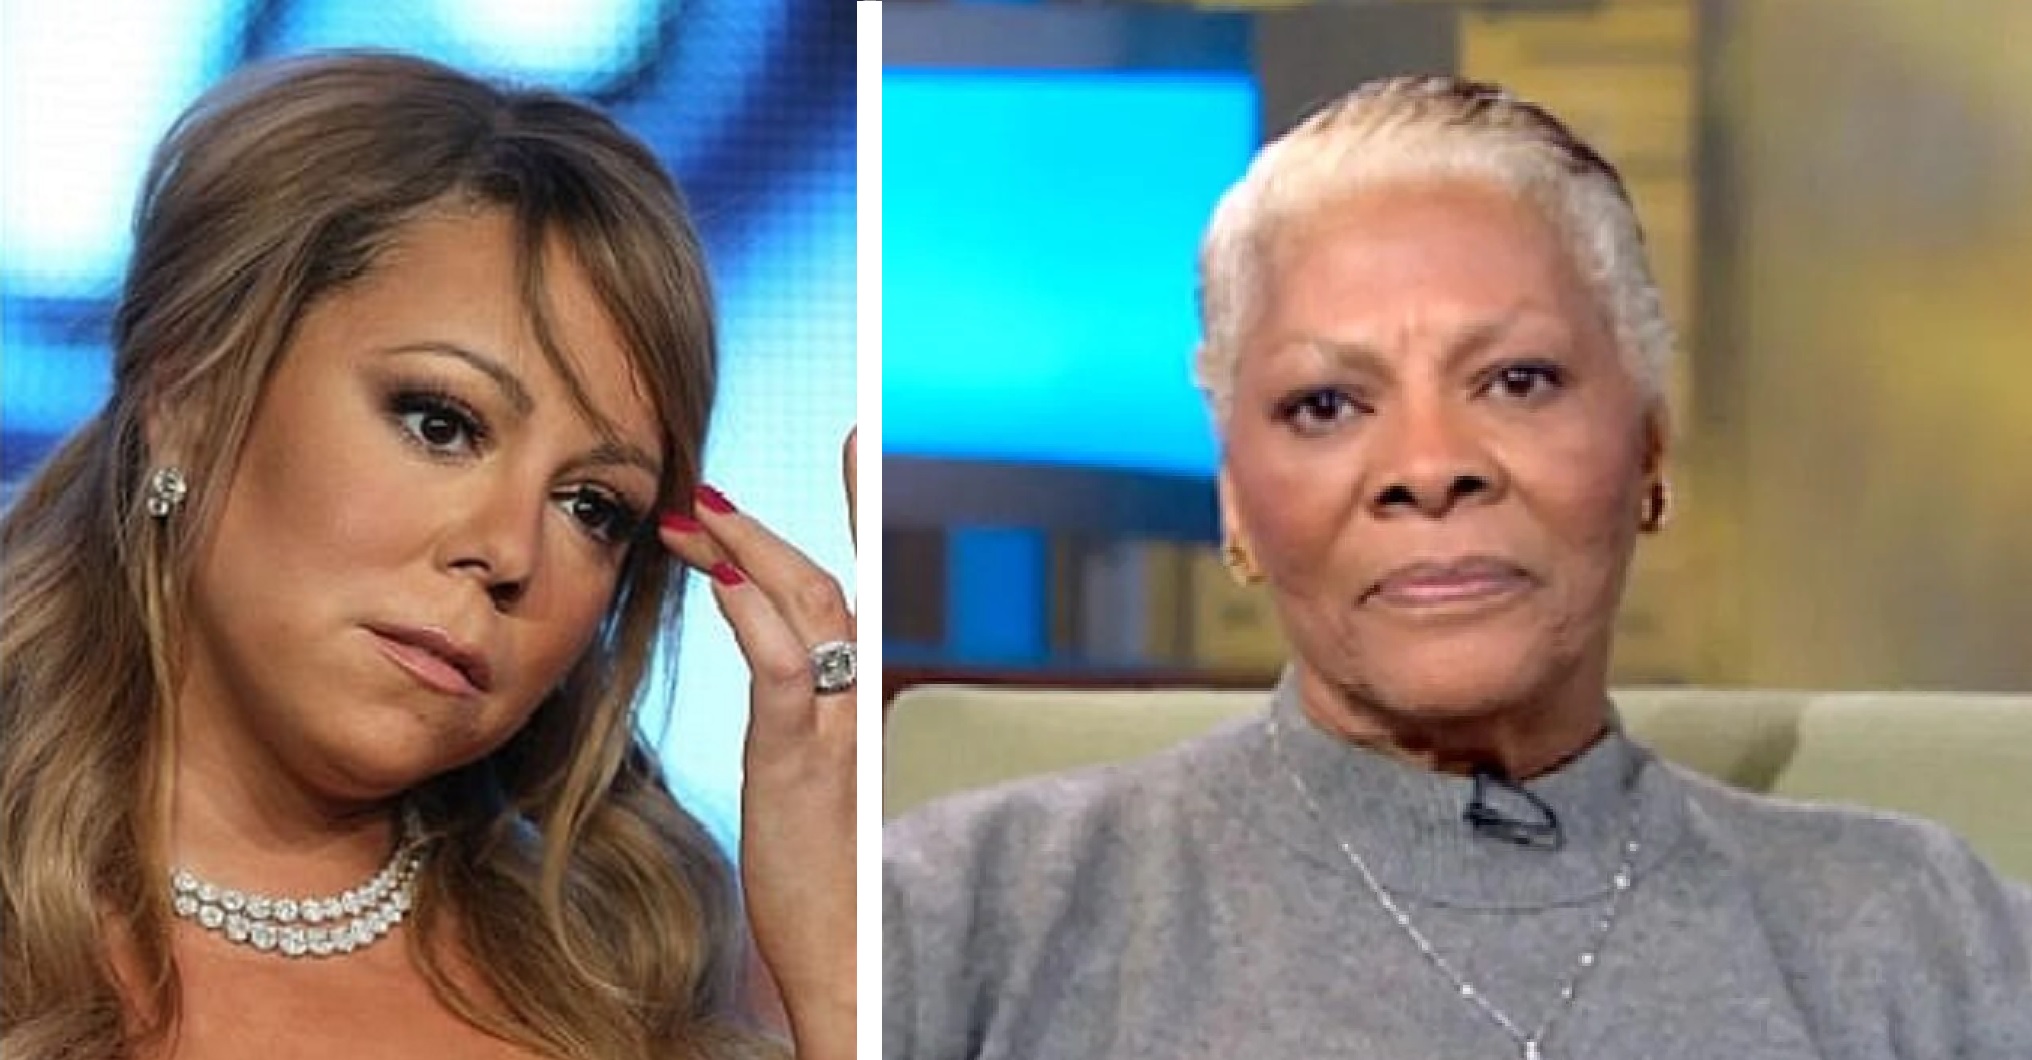 Dionne Warwick Questions Mariah Carey’s ‘Iconic’ Status – ‘I Don’t Know Her That Well’